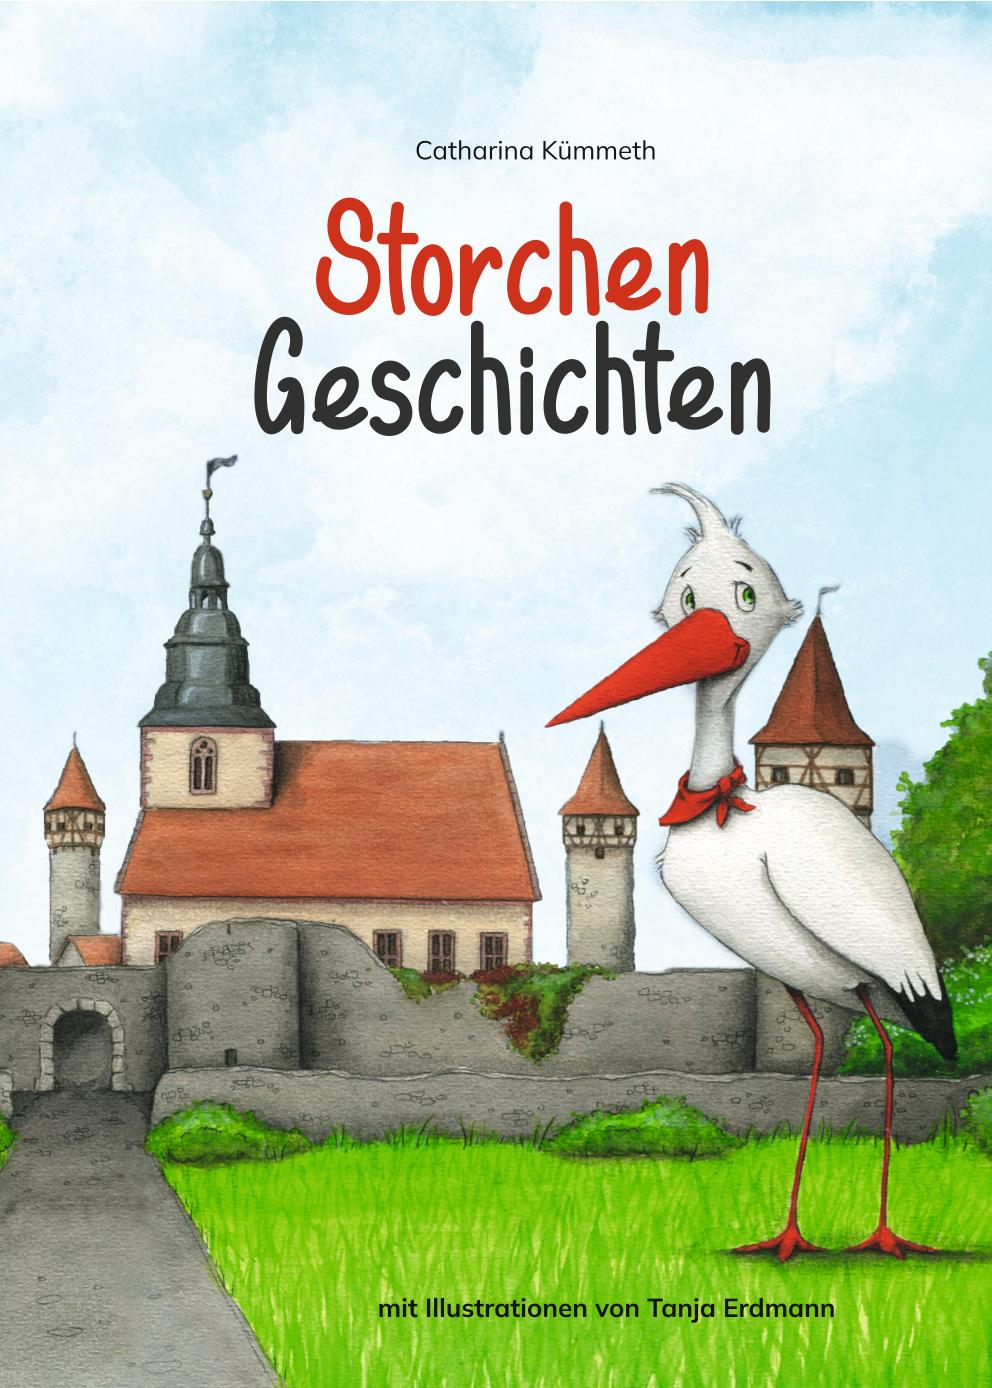 Storch-Buch-Cover